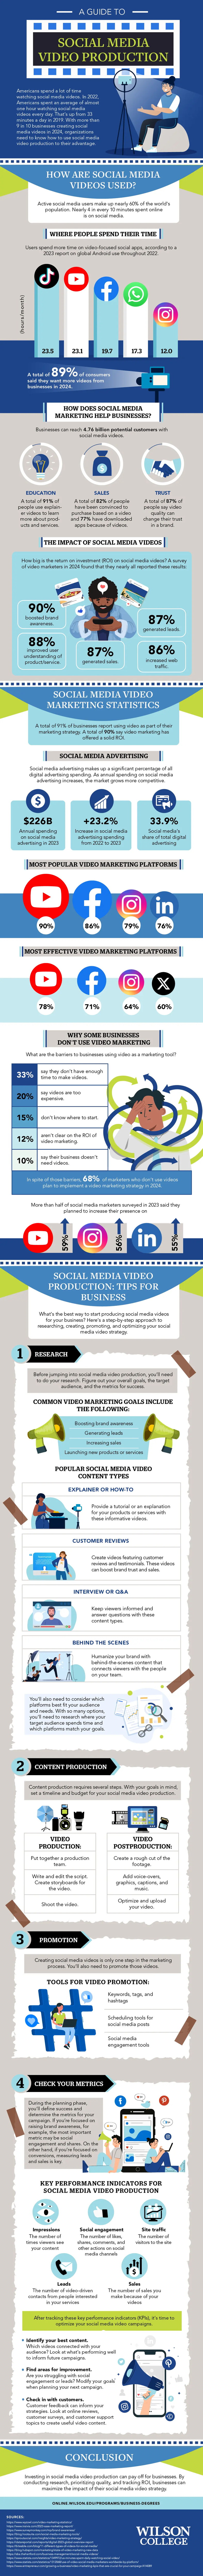 A Guide to Social Media Video Production